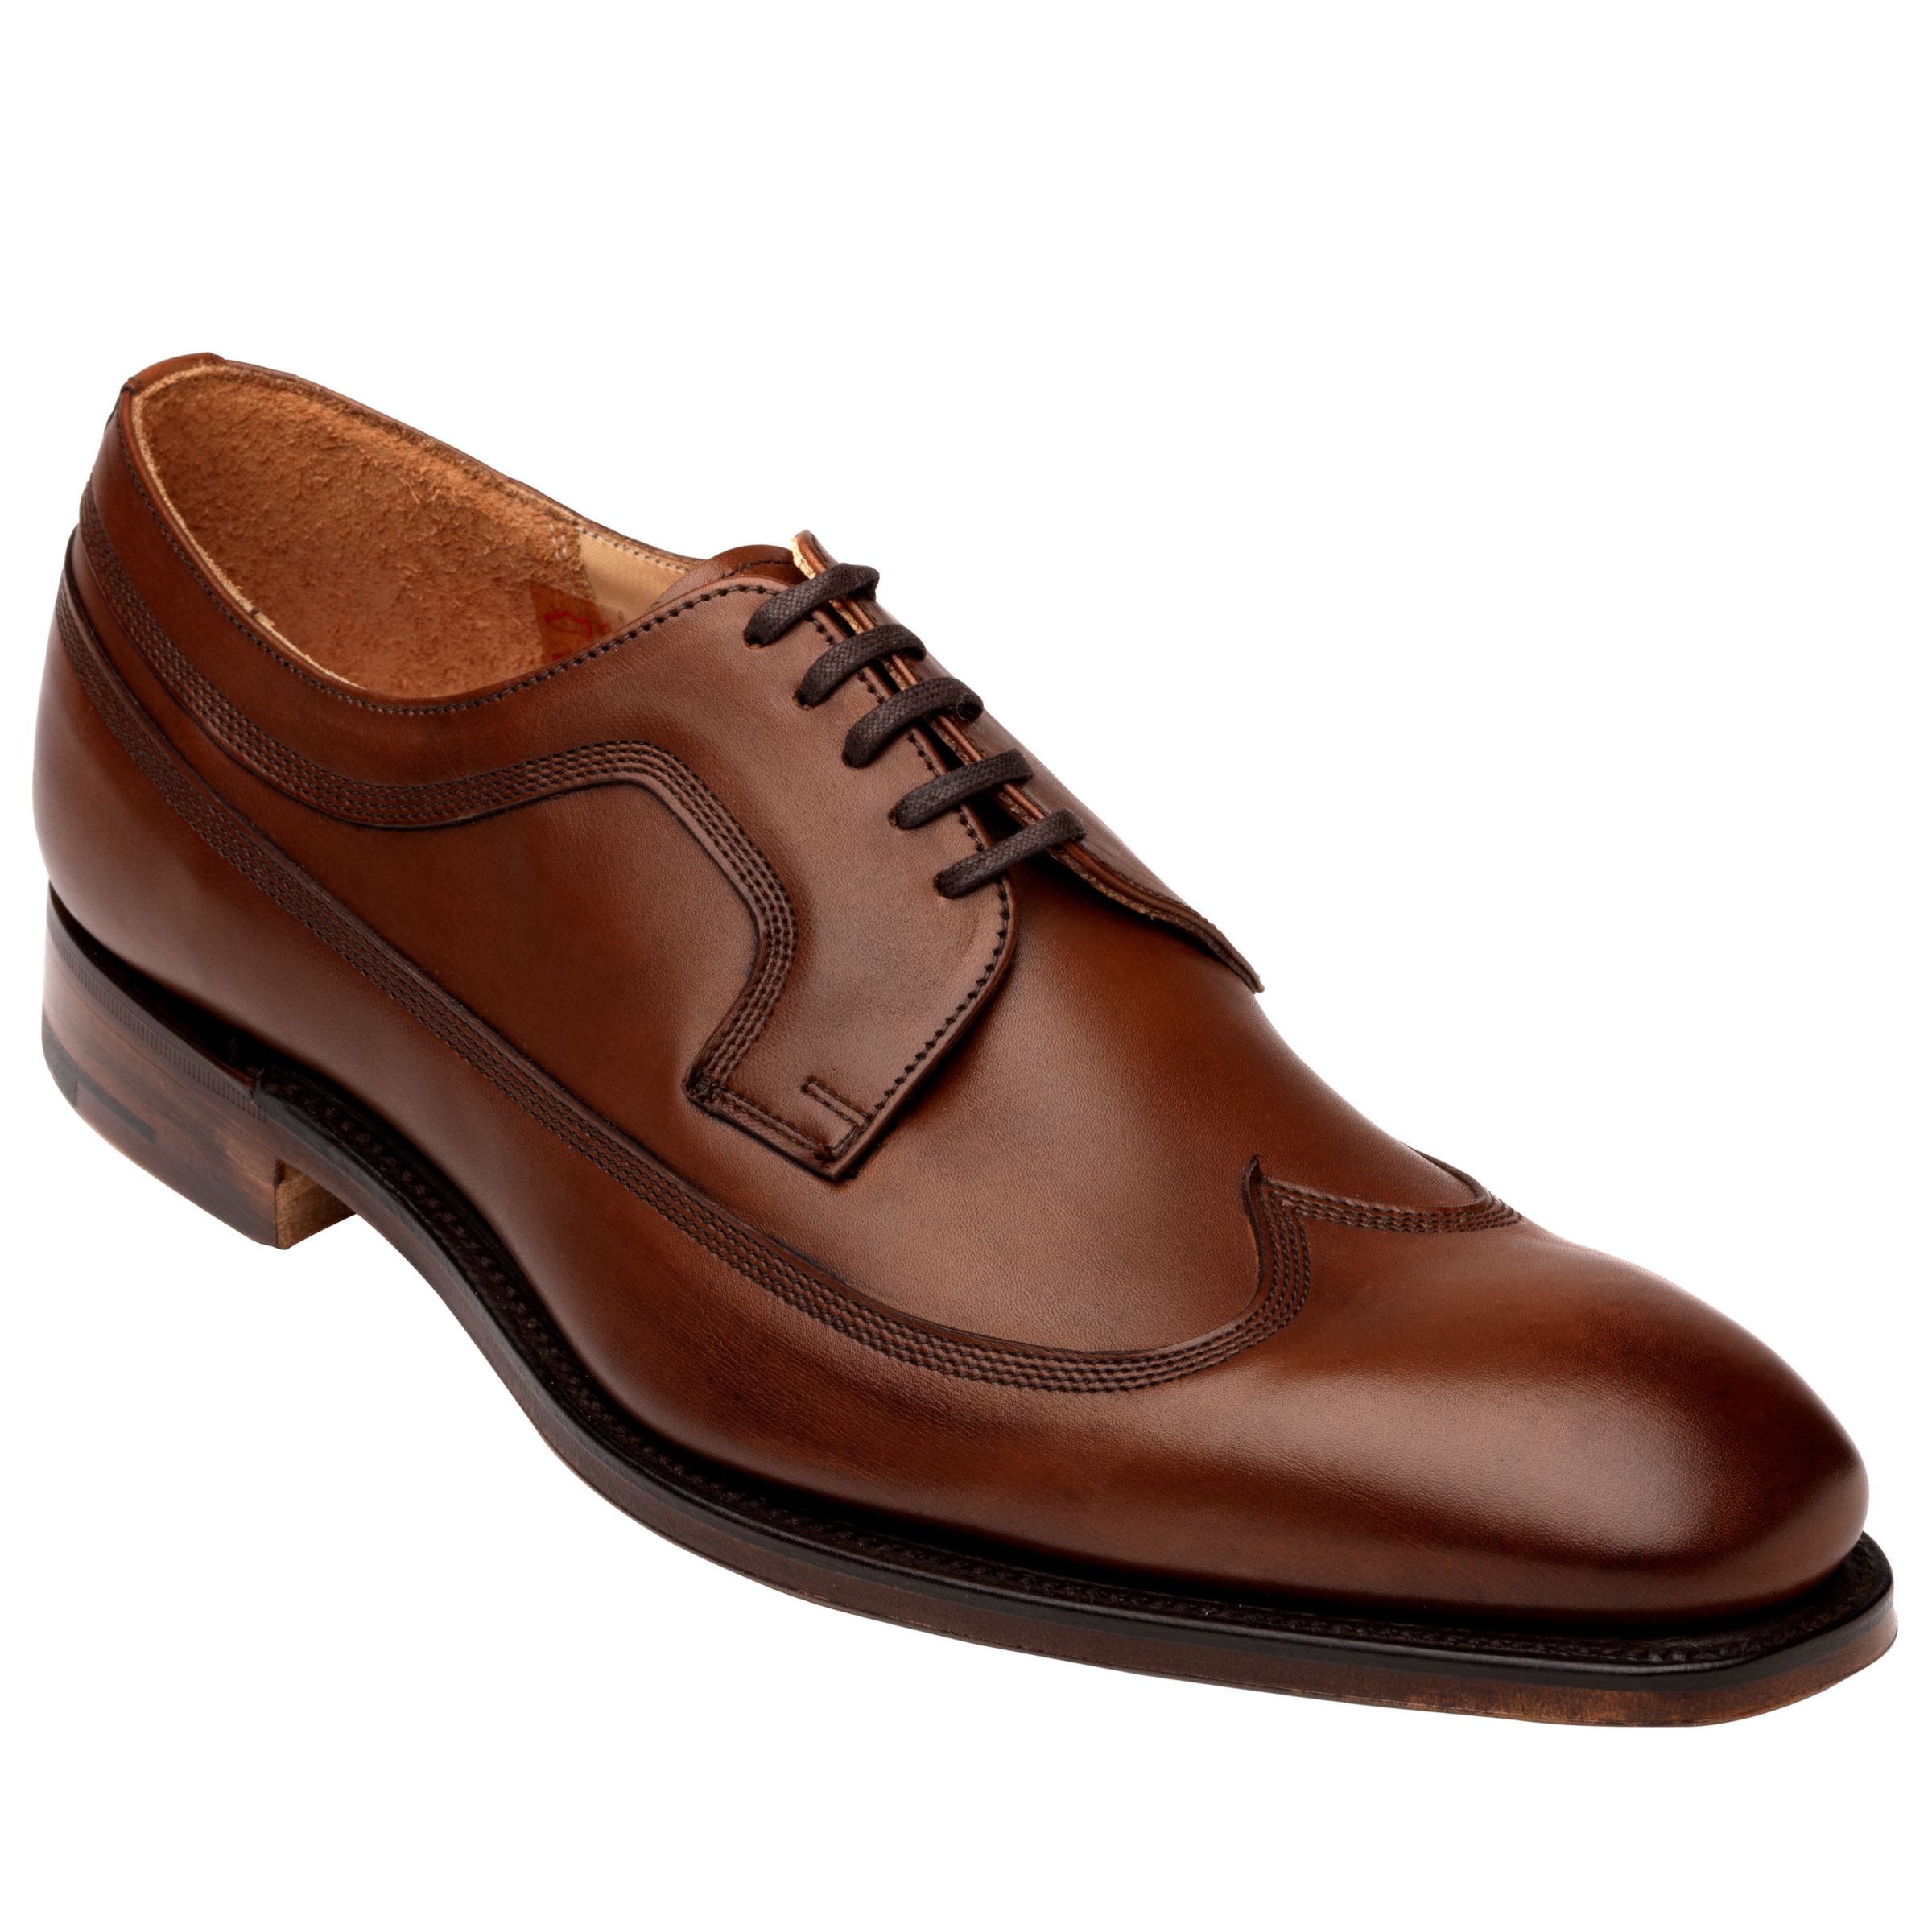 Grenson Phillip Leather Lace Up Shoes, Brown at John Lewis